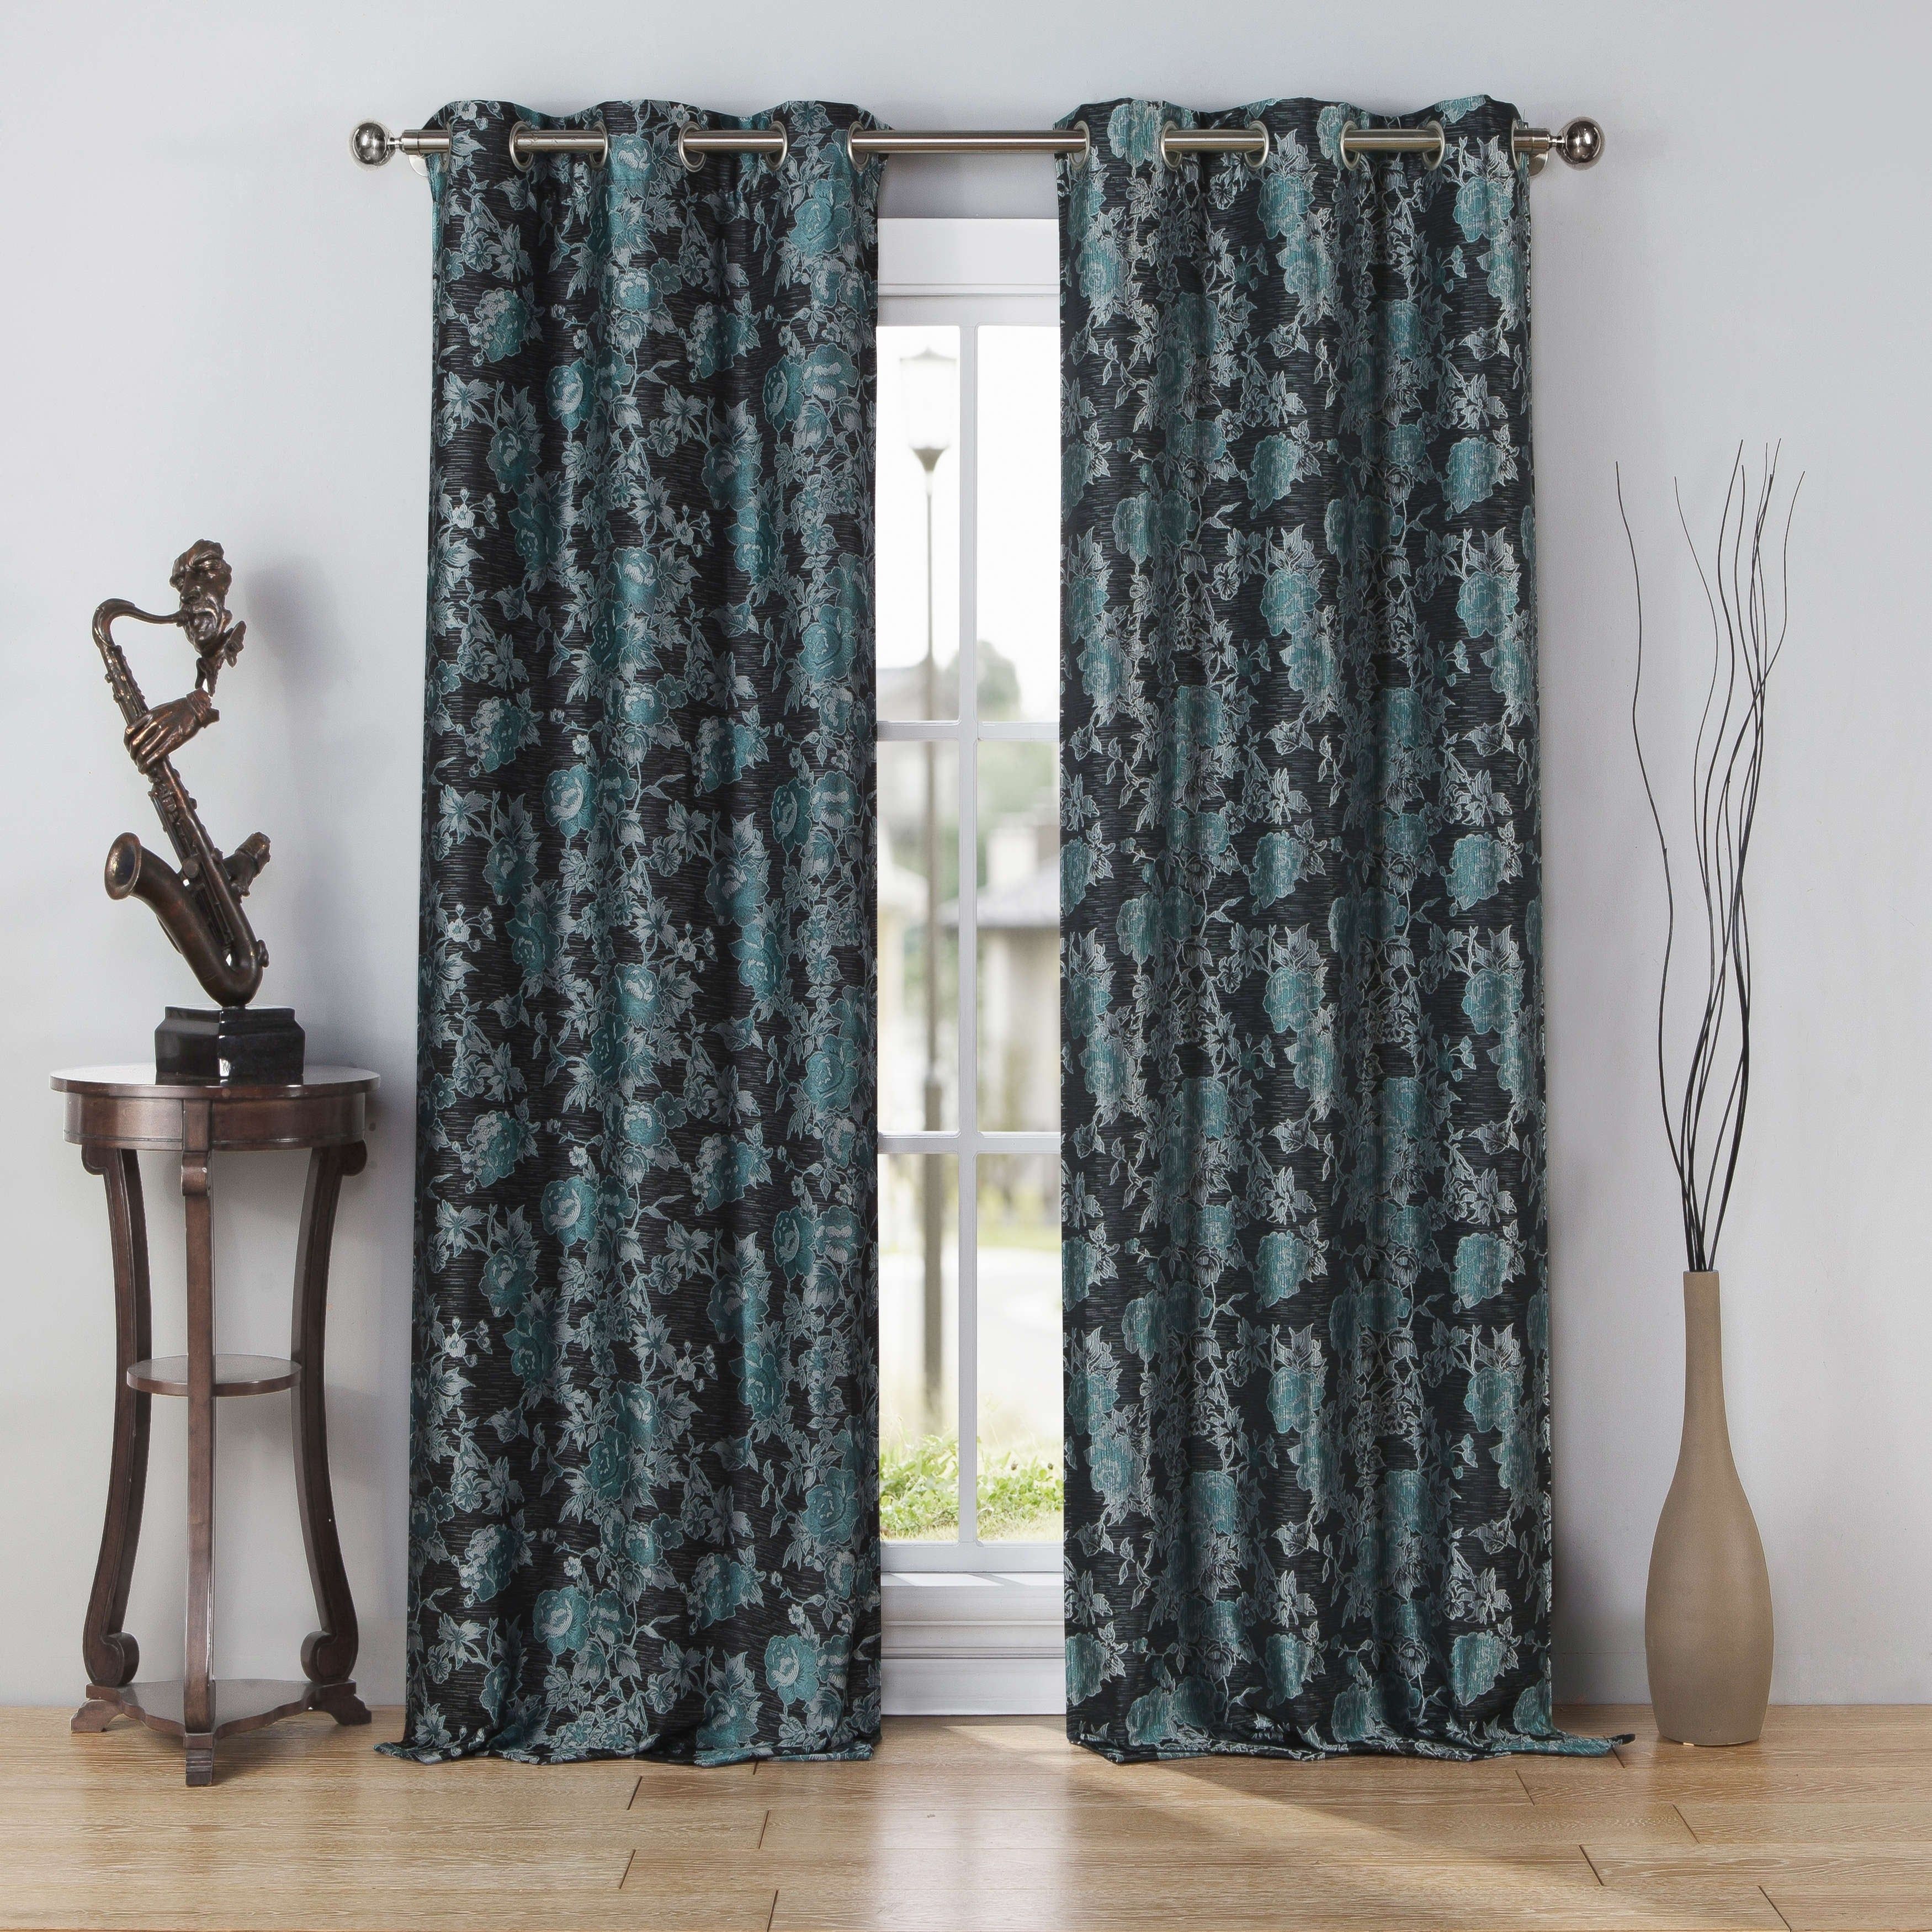 Kensie Nellie Jacquard Curtain Panel Pair – 76x112" Throughout Caldwell Curtain Panel Pairs (View 19 of 20)